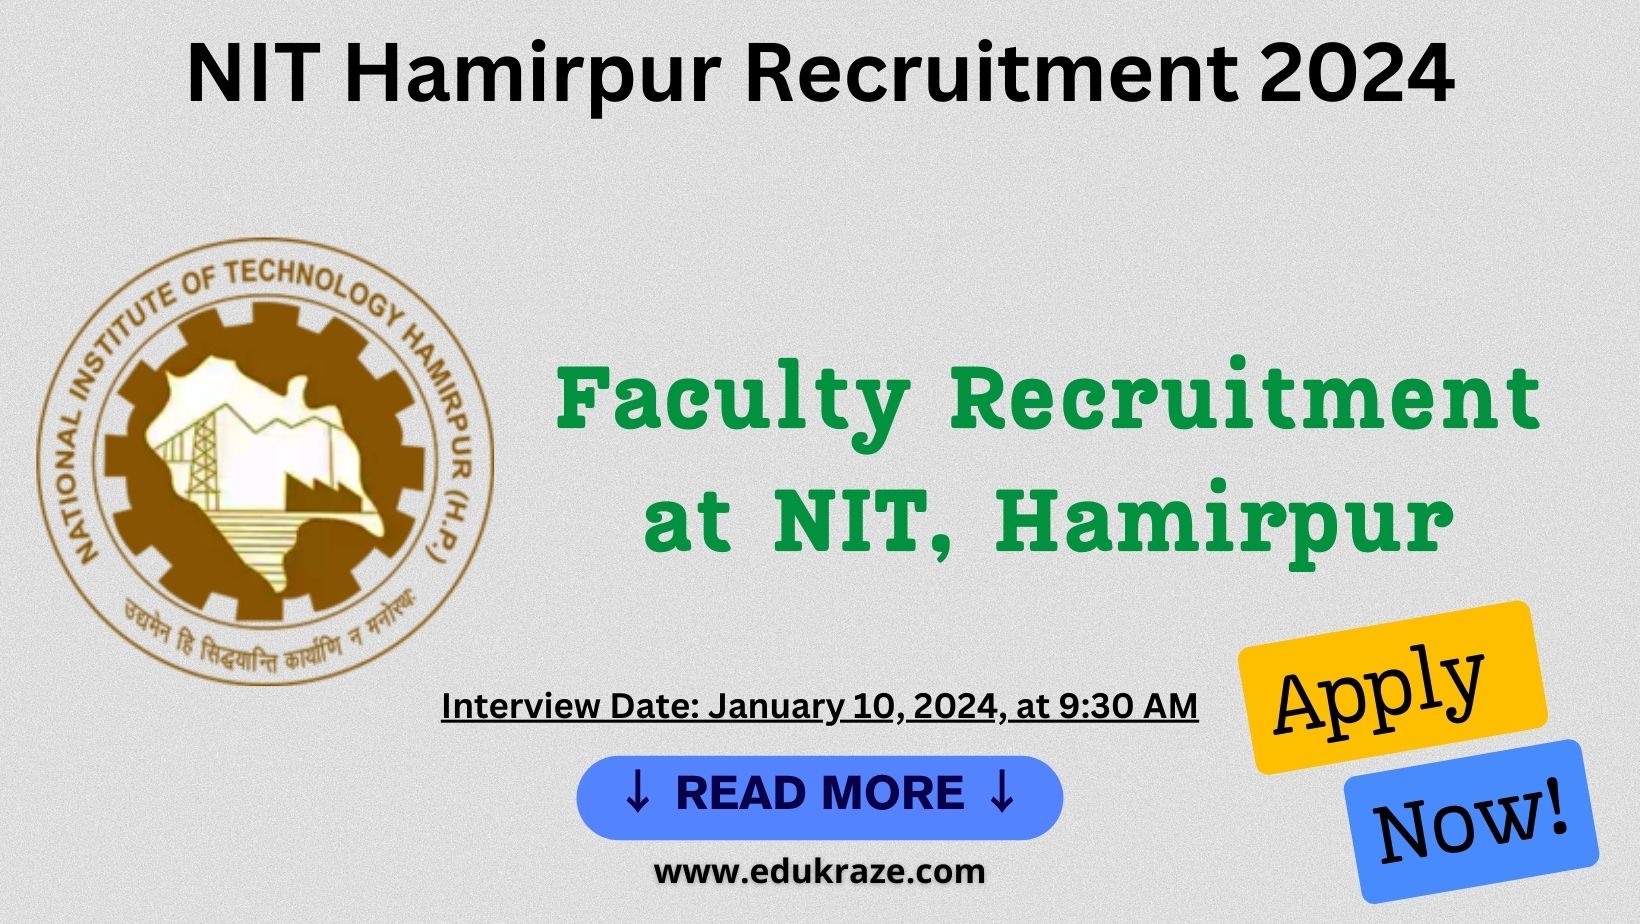 NIT Hamirpur Recruitment 2024: Walk-in Interview for Temporary Faculty